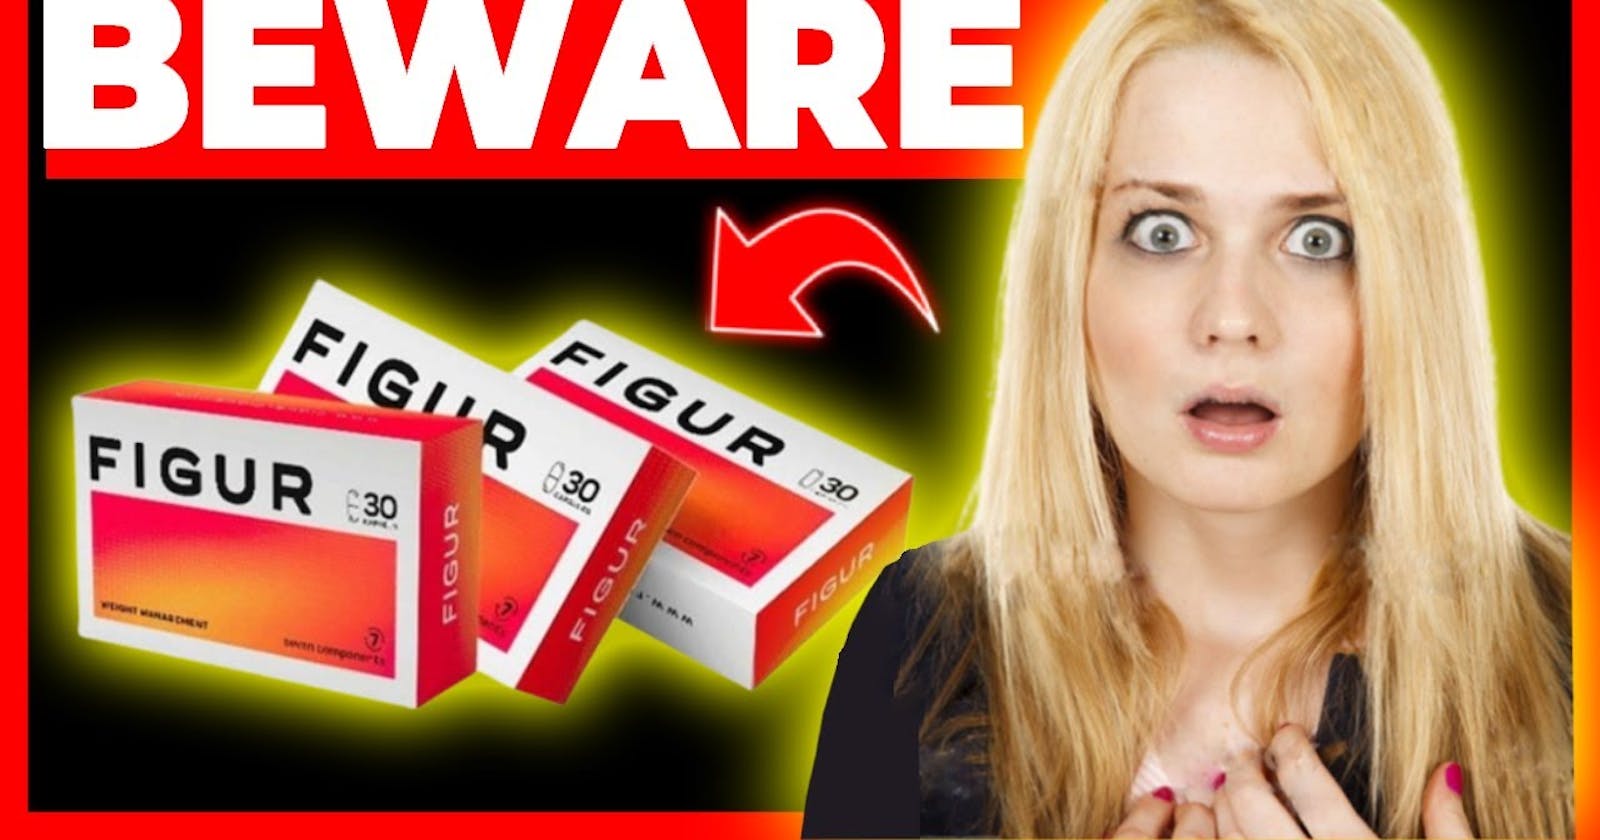 Figur UK Reviews BEWARE Don’t Buy Until You See This